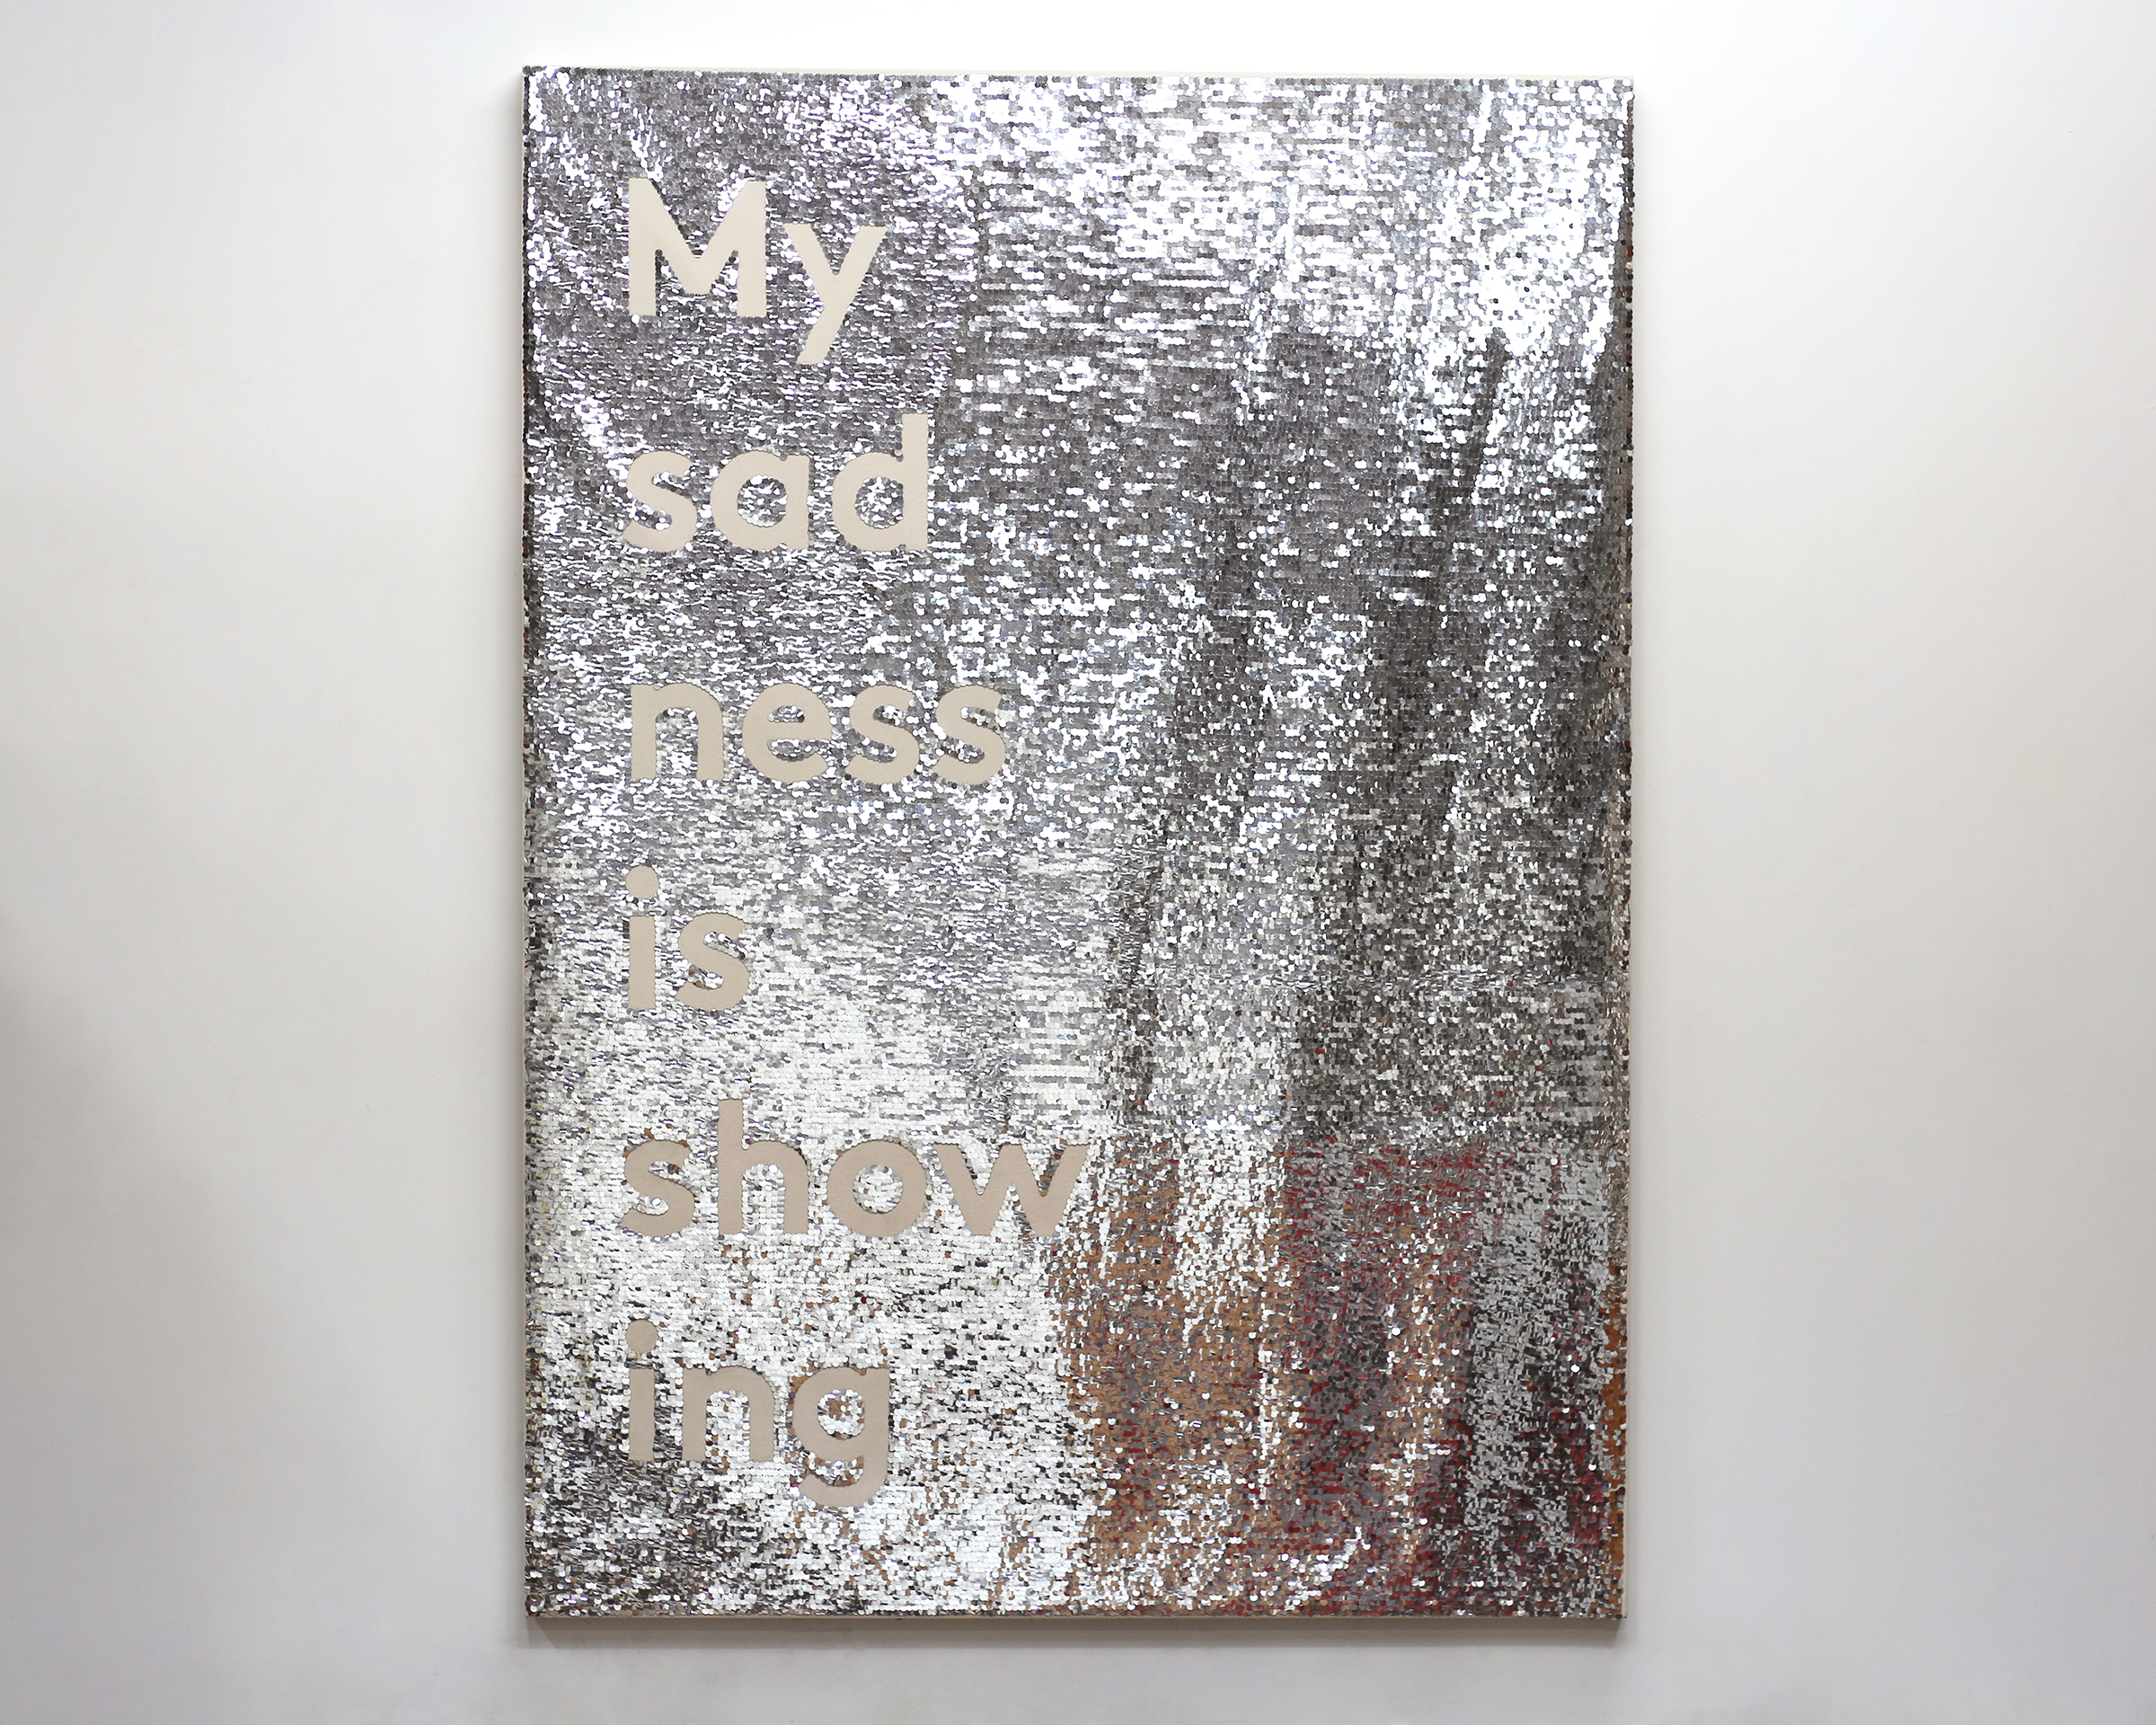   My sadness is showing  Sequin, embroidery thread on canvas, wooden supports, sandbags 60” x 84” 2016-2018 